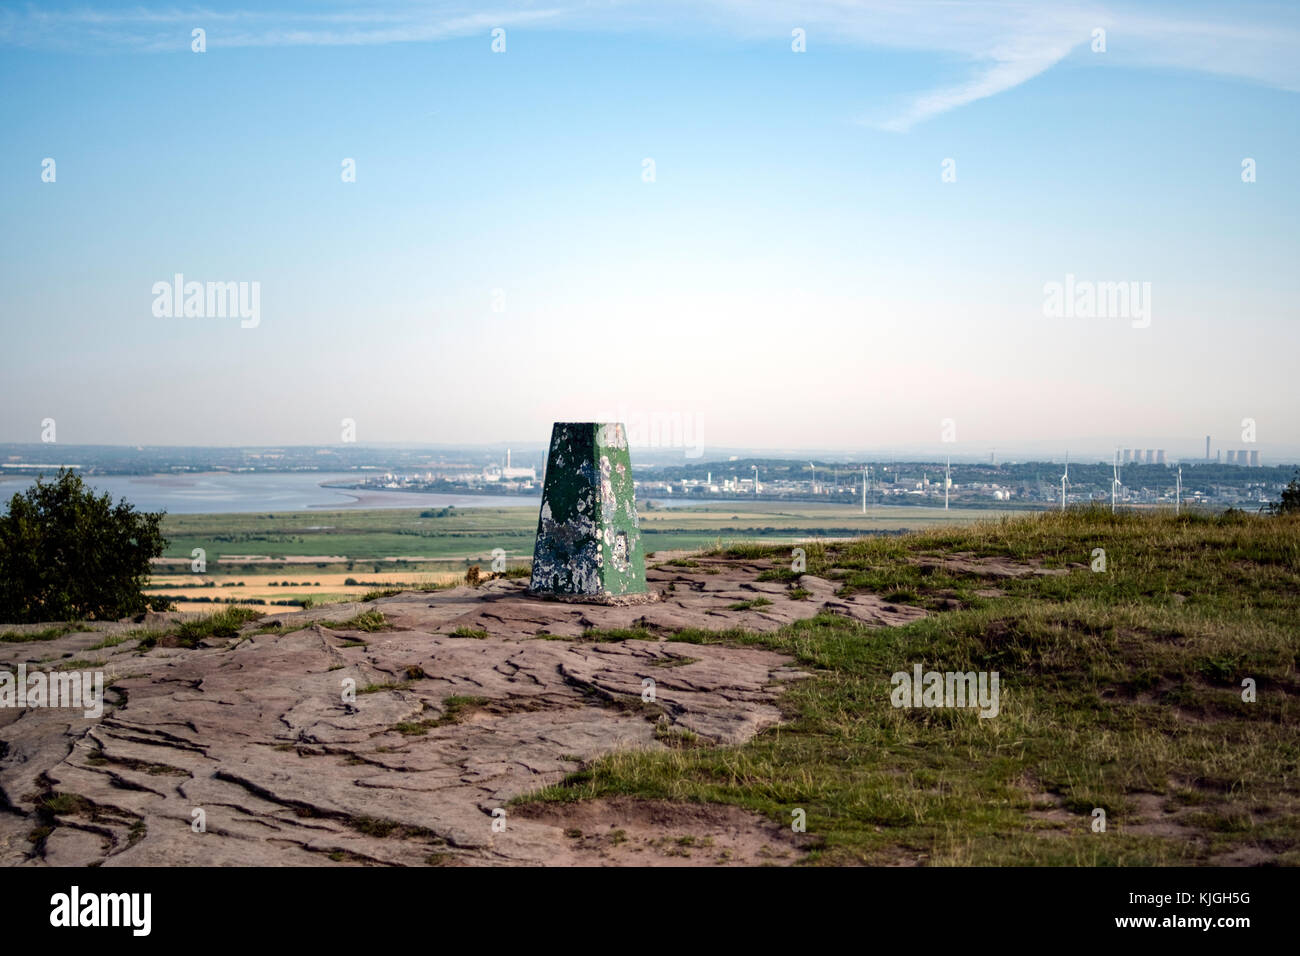 Trig point on Helsby hill overlooking the Mersey estuary, Helsby, Cheshire. Stock Photo